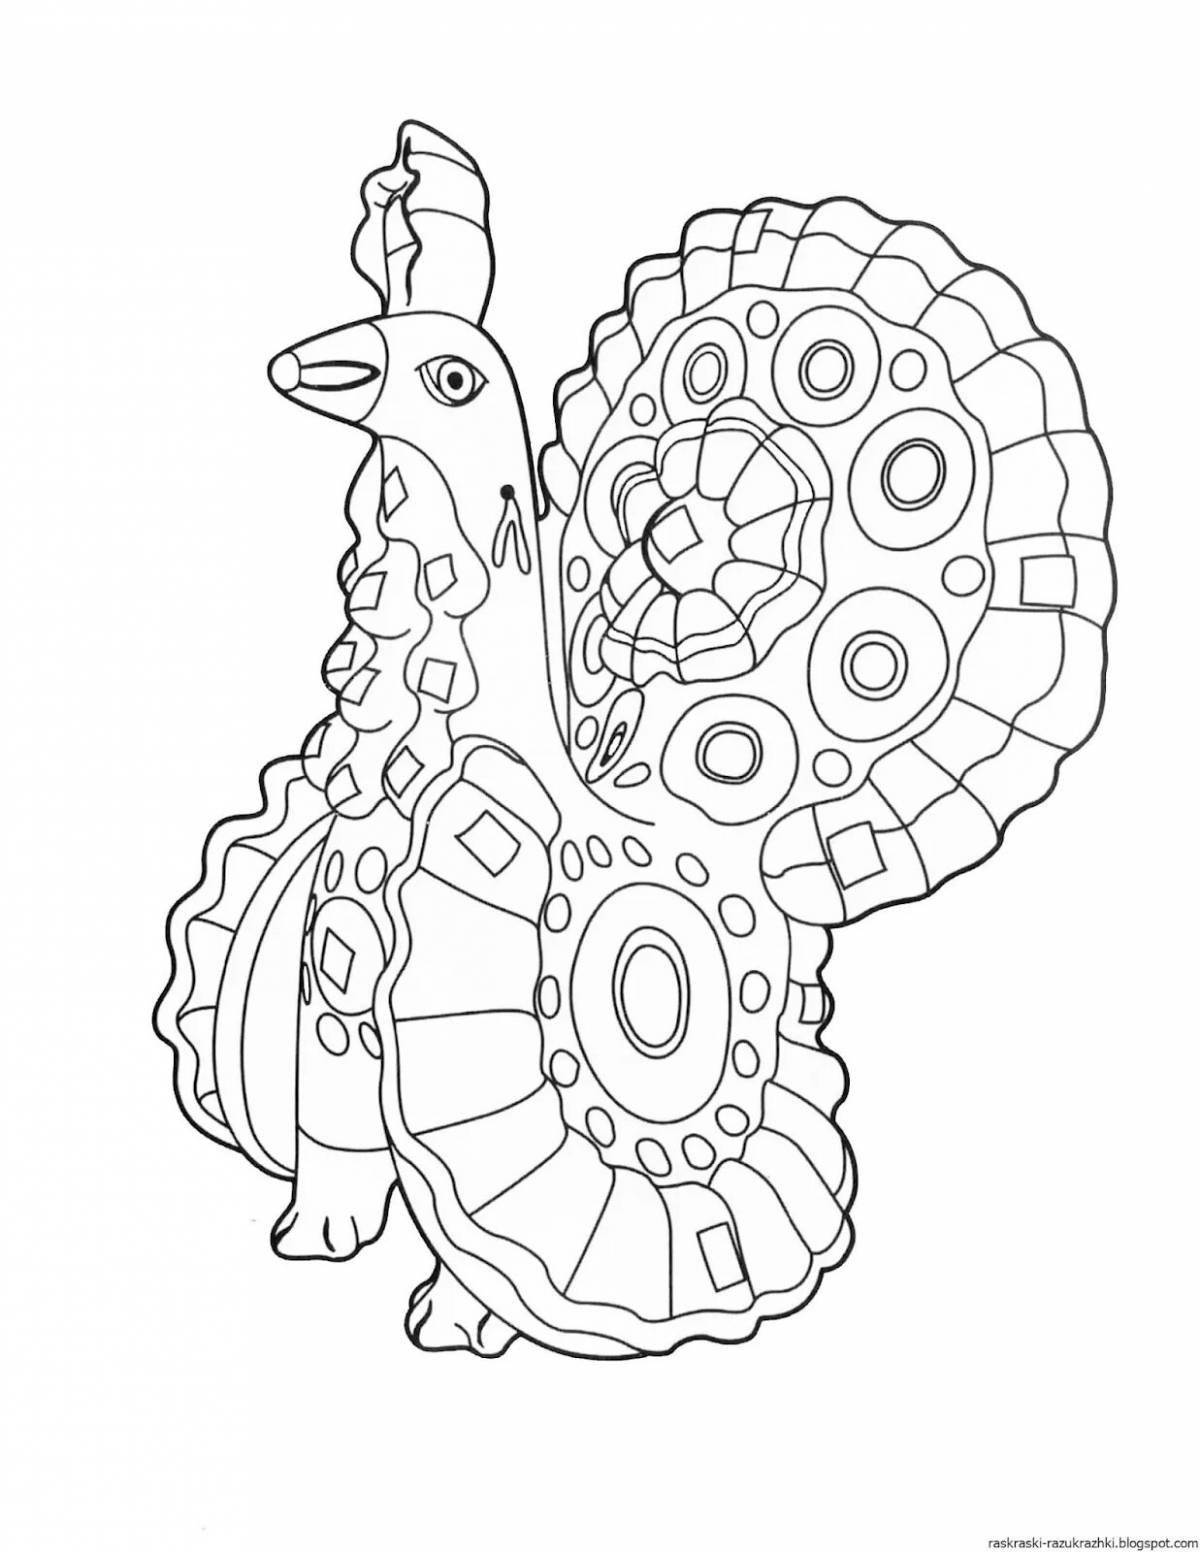 Colorful coloring Dymkovo rooster for preschoolers